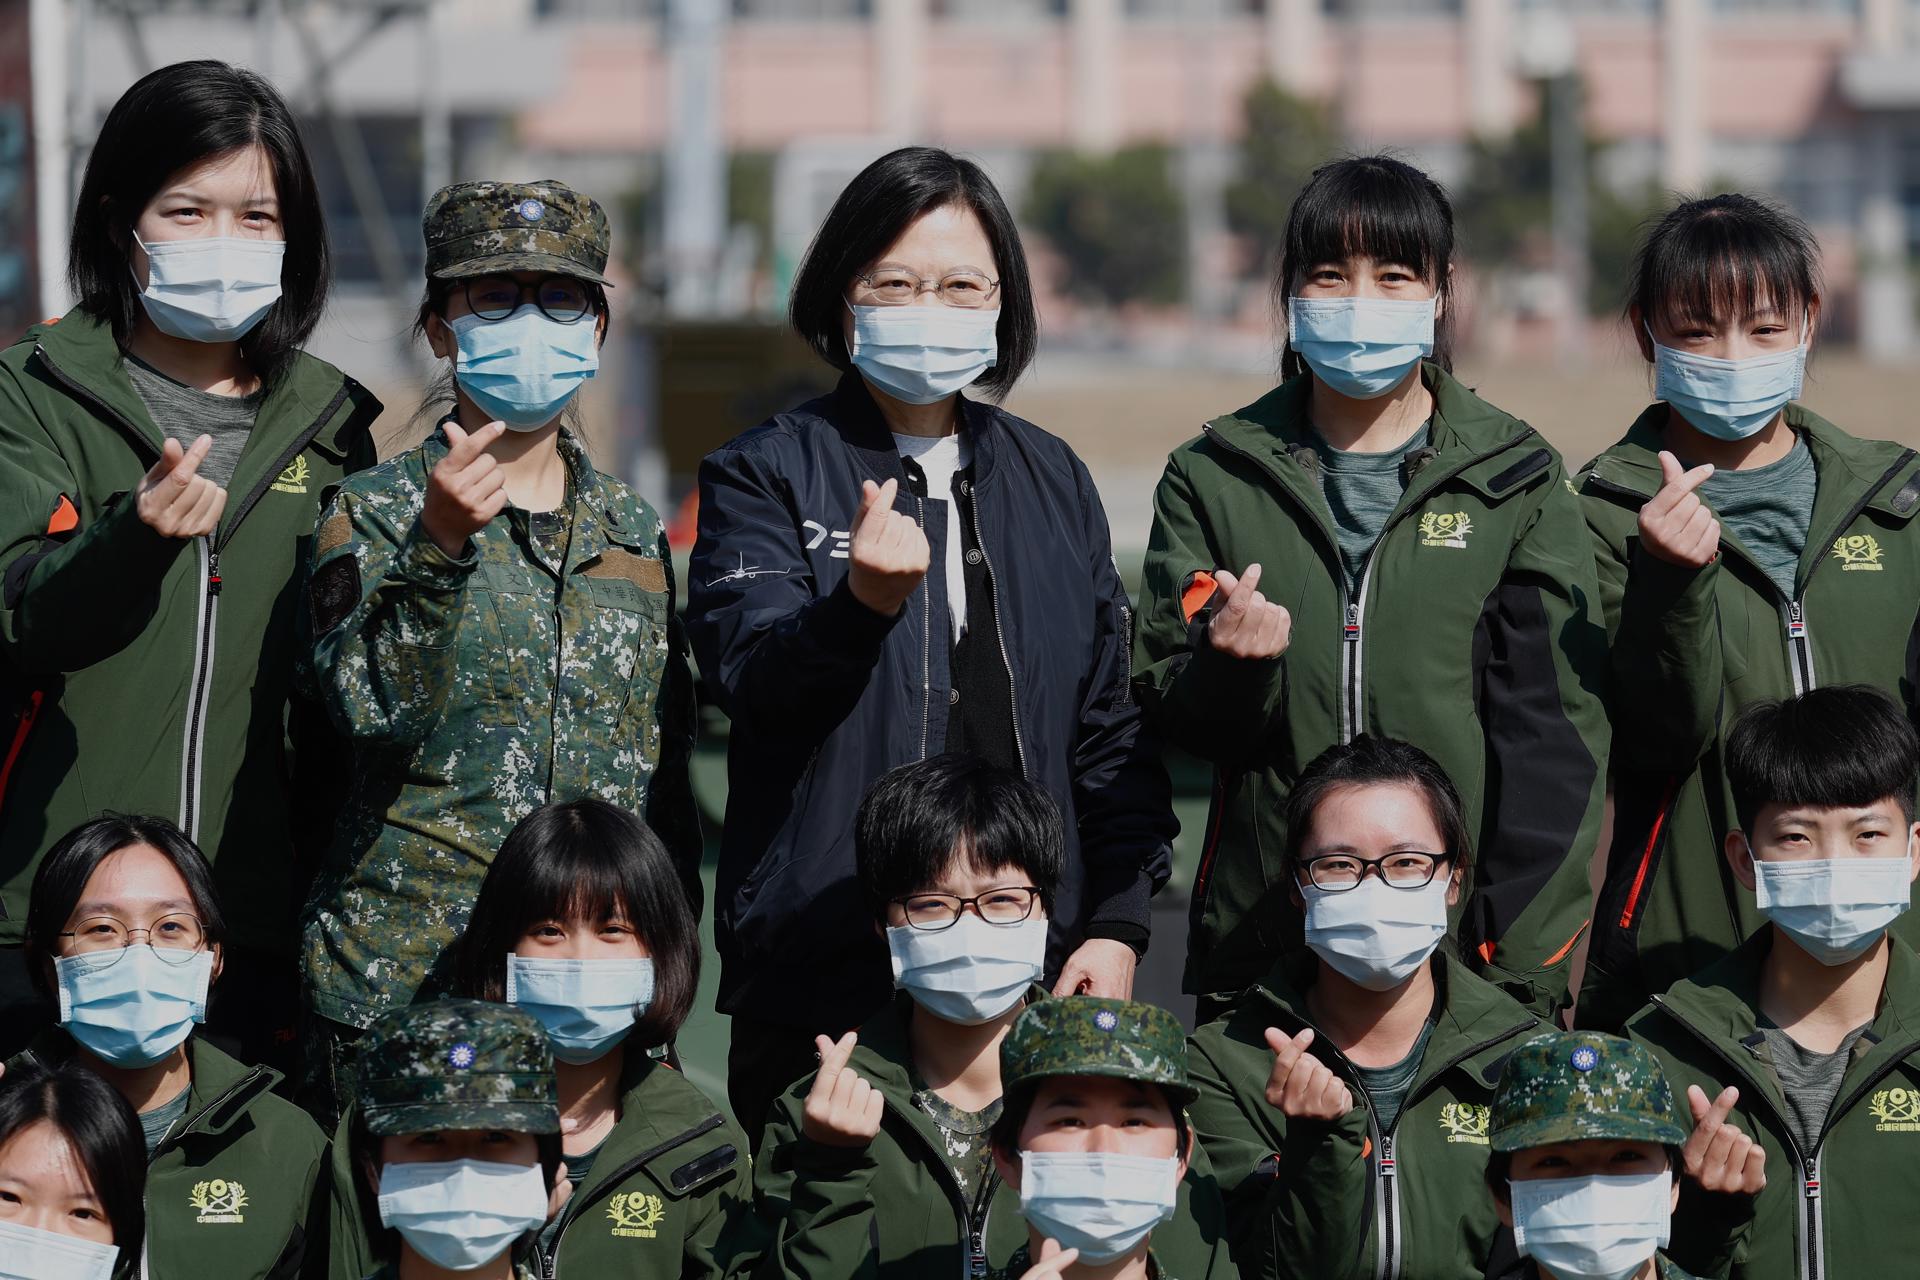 Taiwan President Tsai Ing-wen (C) poses for a group photo during her visit to a Military base in Taiwan, 15 January 2021. EFE-EPA/RITCHIE B. TONGO
